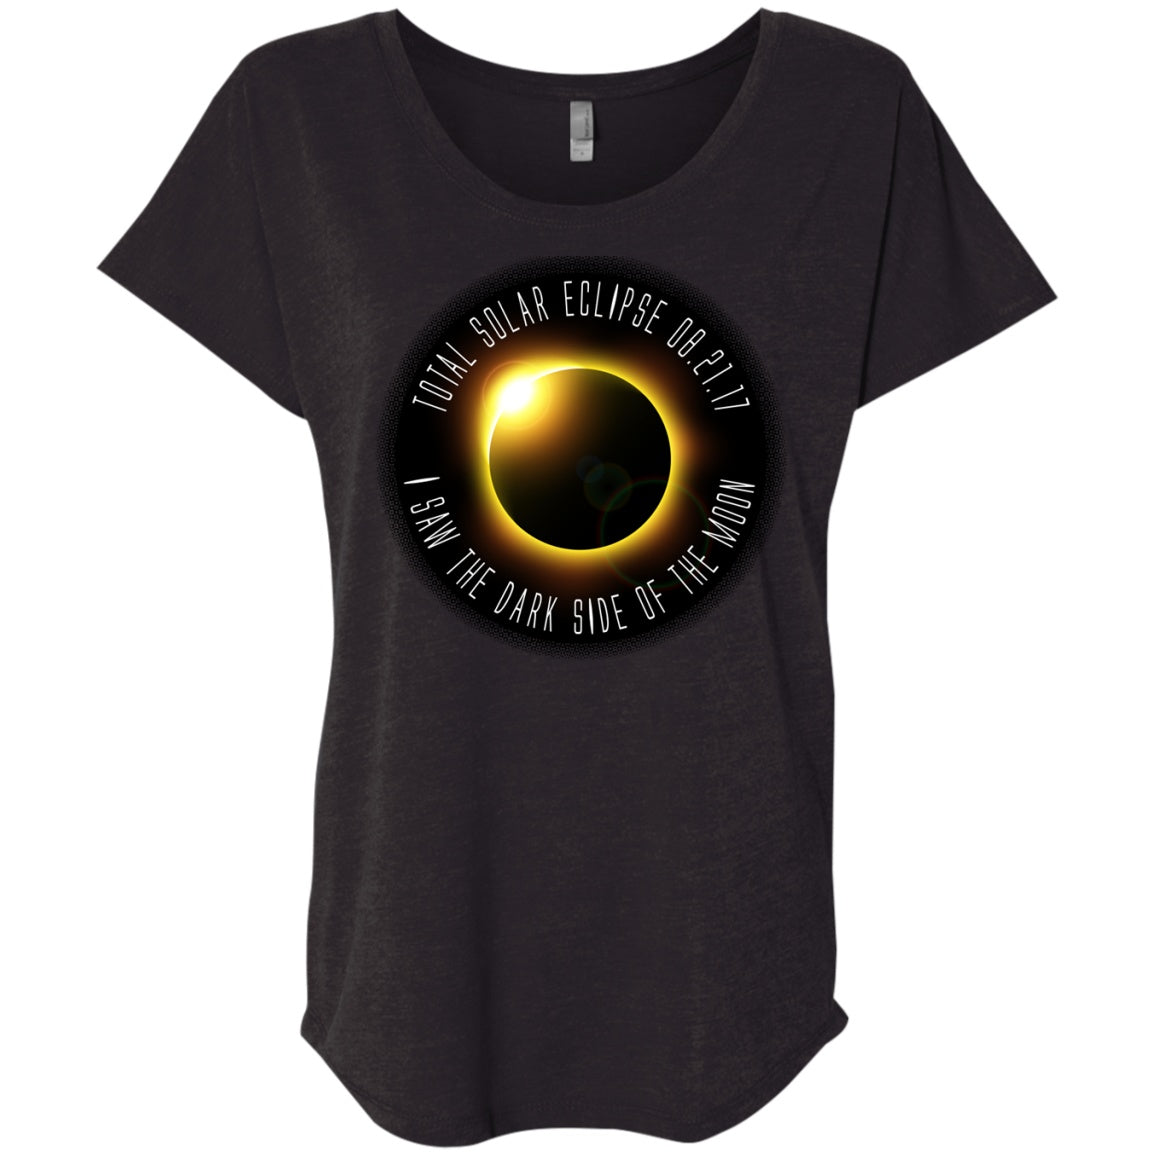 Total Solar Eclipse 2017 Shirts for Men Women - I Saw The Dark Side Of The Moon - GoneBold.gift